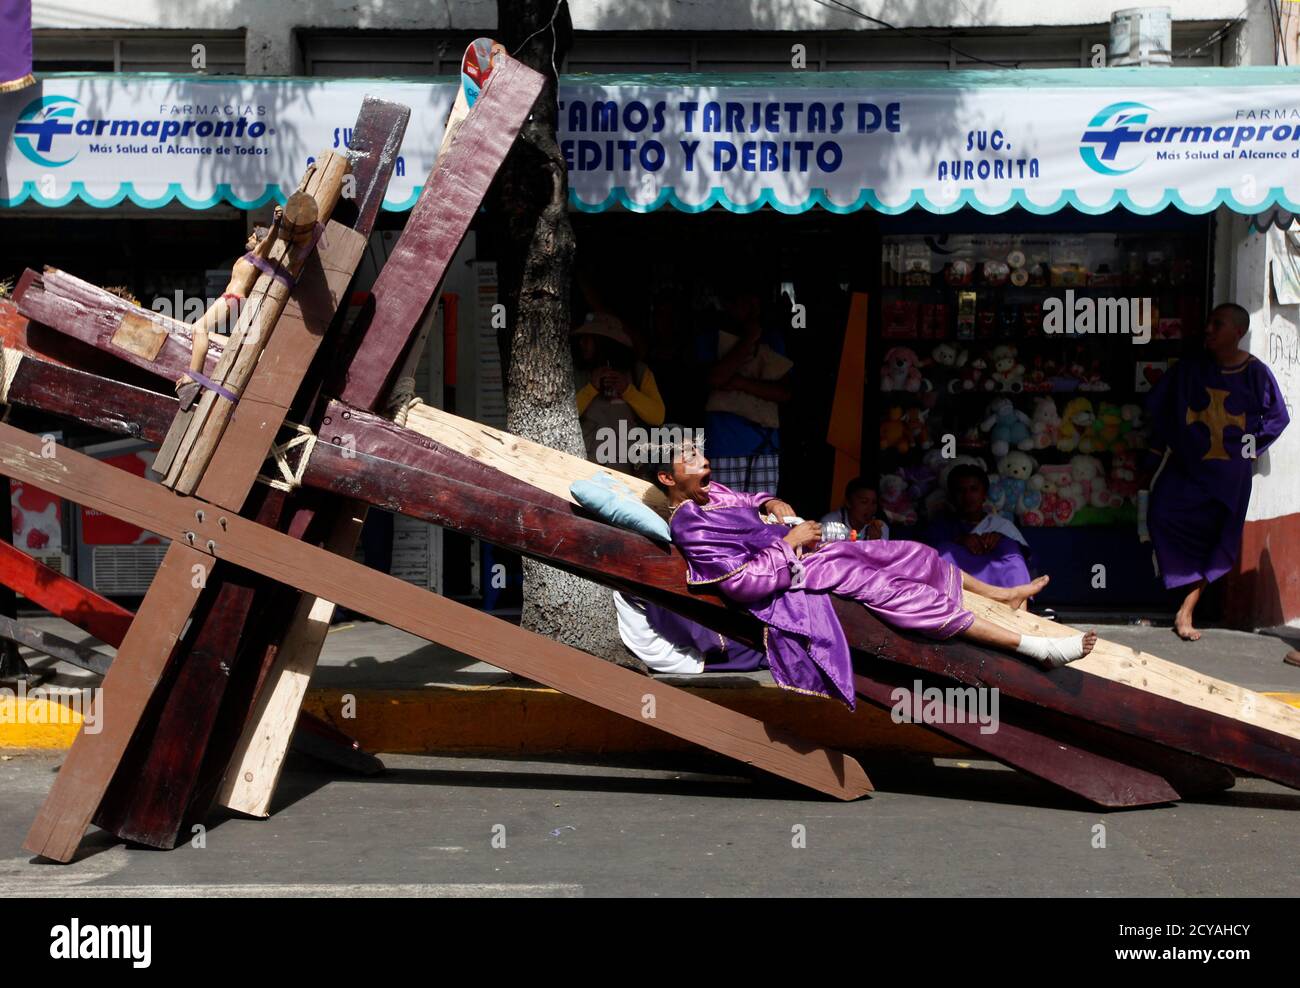 A penitent yawns while resting on crosses to be used during a re-enactment of the crucifixion of Jesus Christ on Good Friday in Iztapalapa in Mexico City April 6, 2012.    REUTERS/Edgard Garrido (MEXICO - Tags: RELIGION ANNIVERSARY SOCIETY) Stock Photo